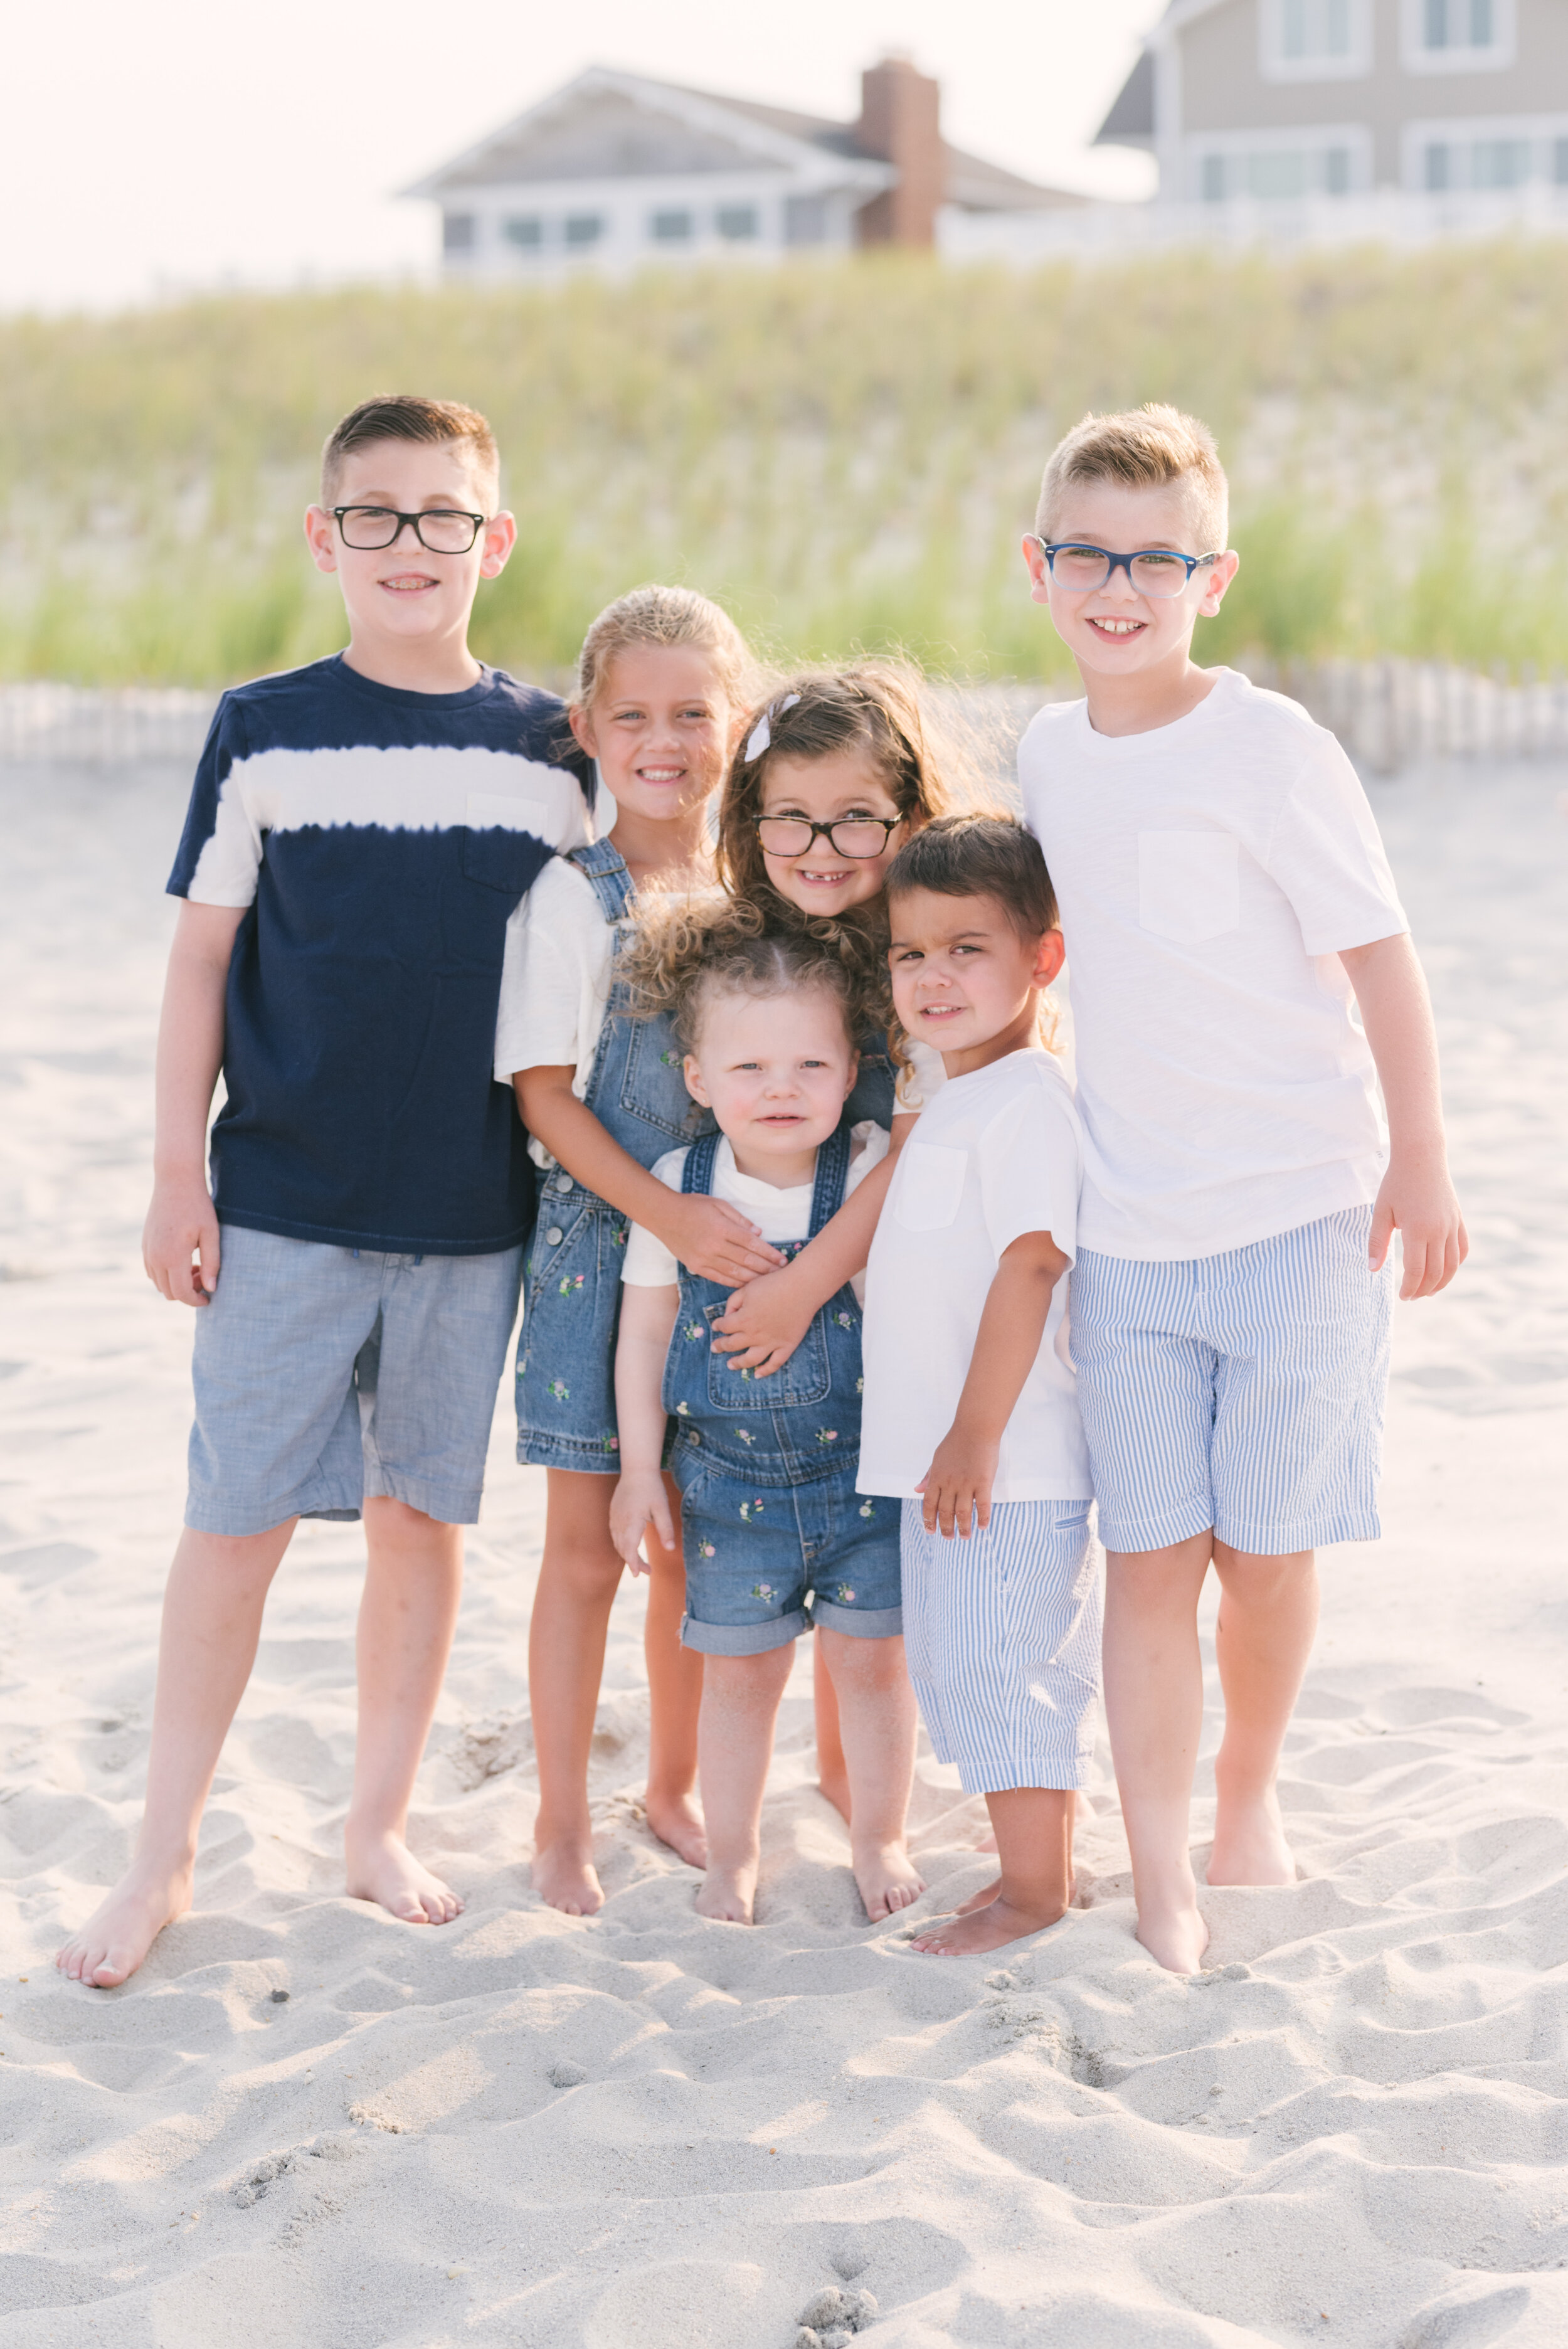 Cousins standing next to each other during beach photos  | NKB Photo